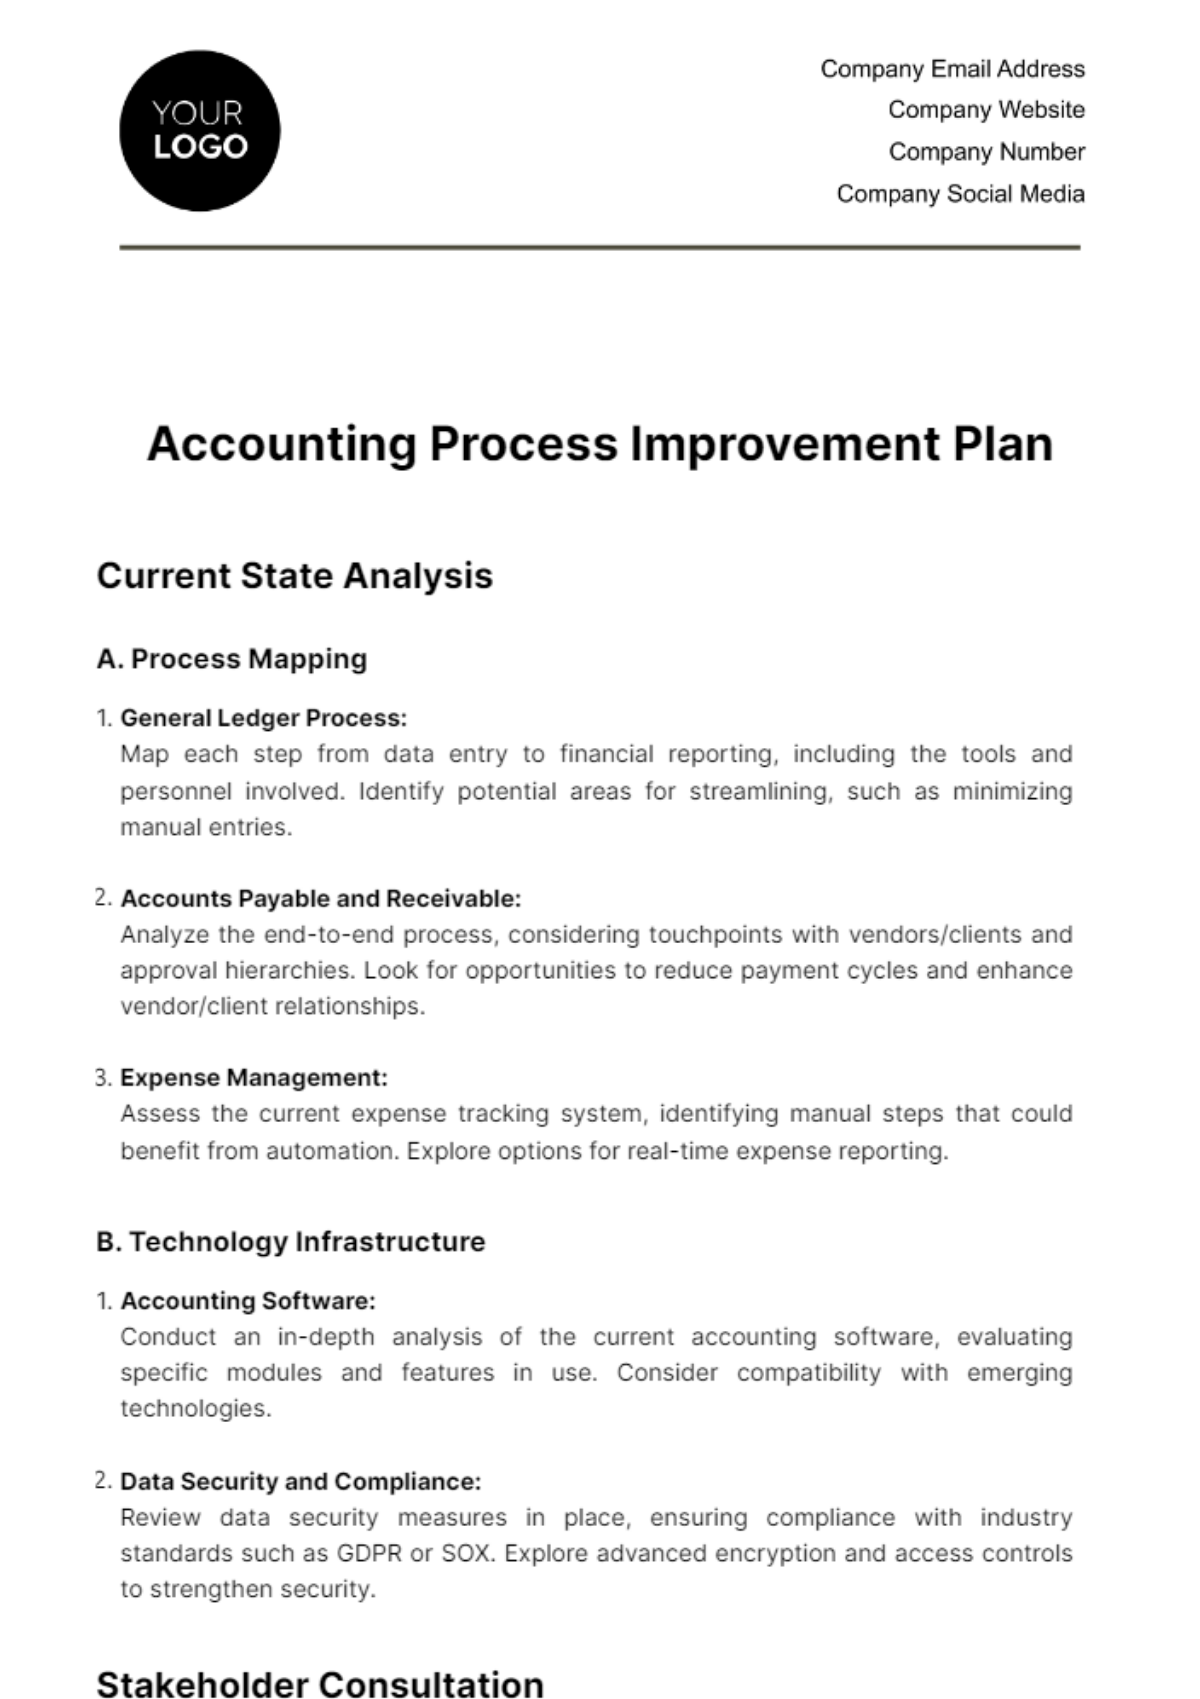 Free Accounting Process Improvement Plan Template